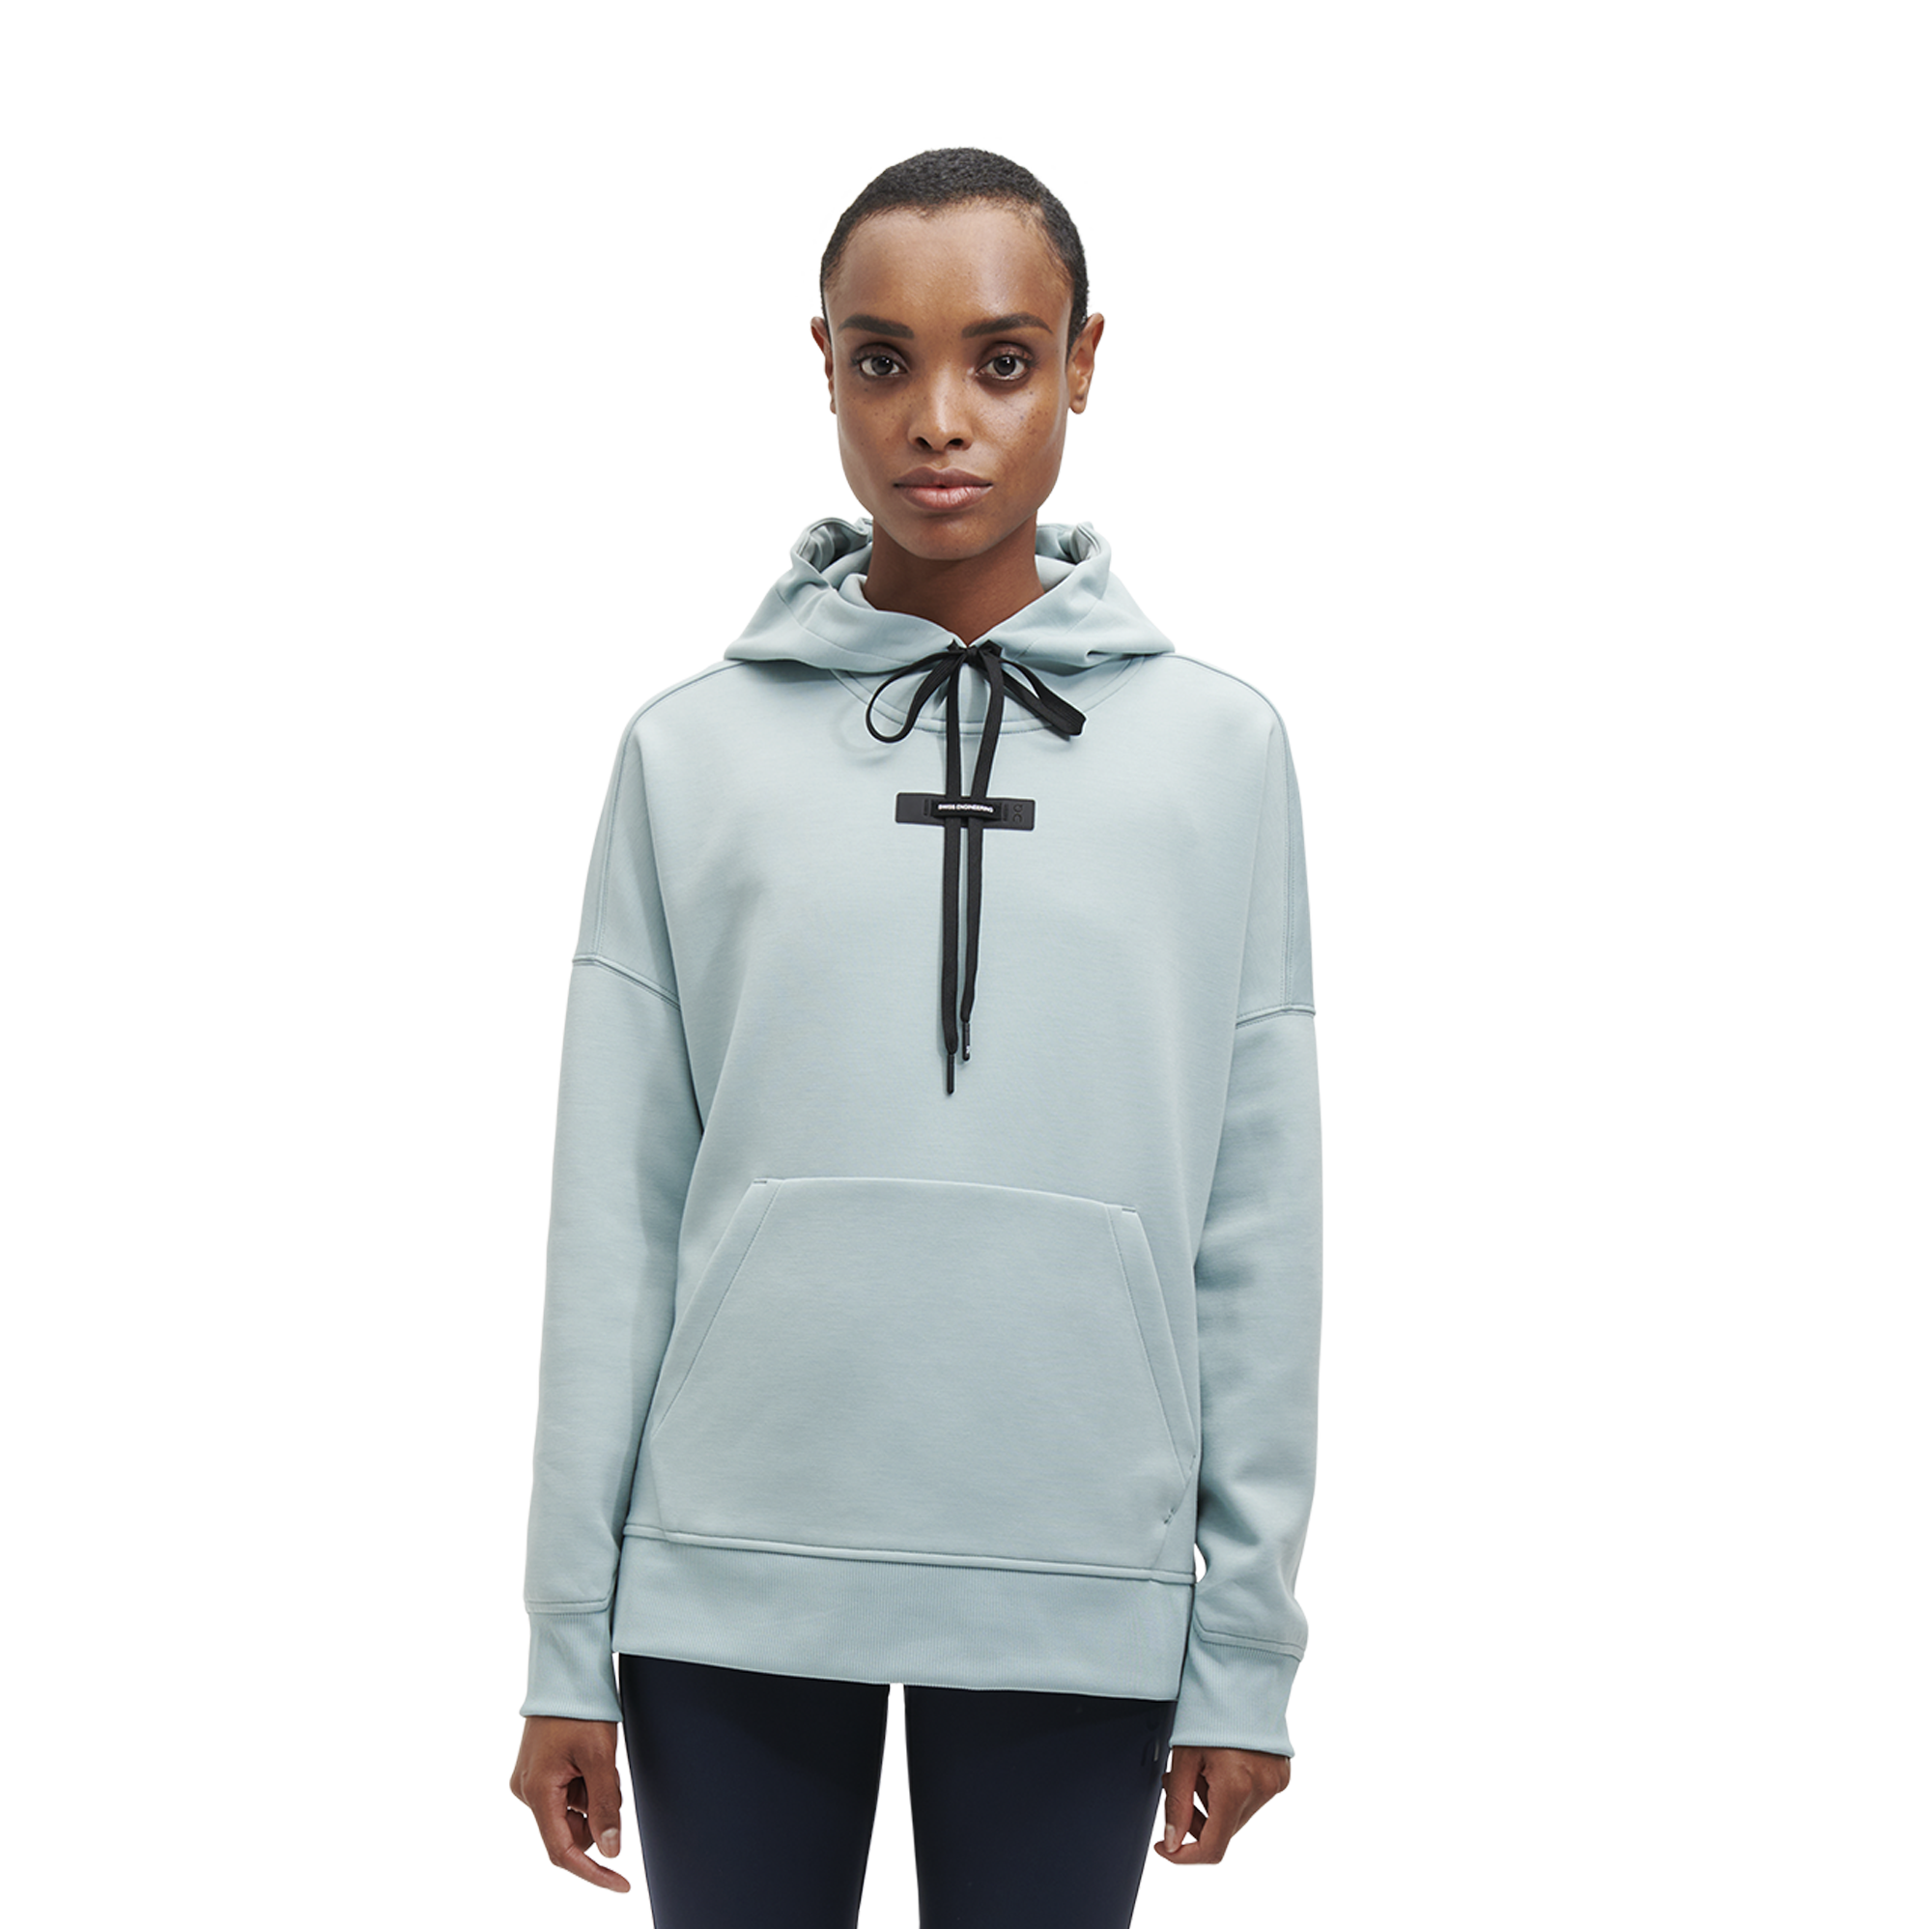 OXYGOD - OG ONGOD BLK WMS CRP HOODIE WOMEN'S CROPPED HOODIE